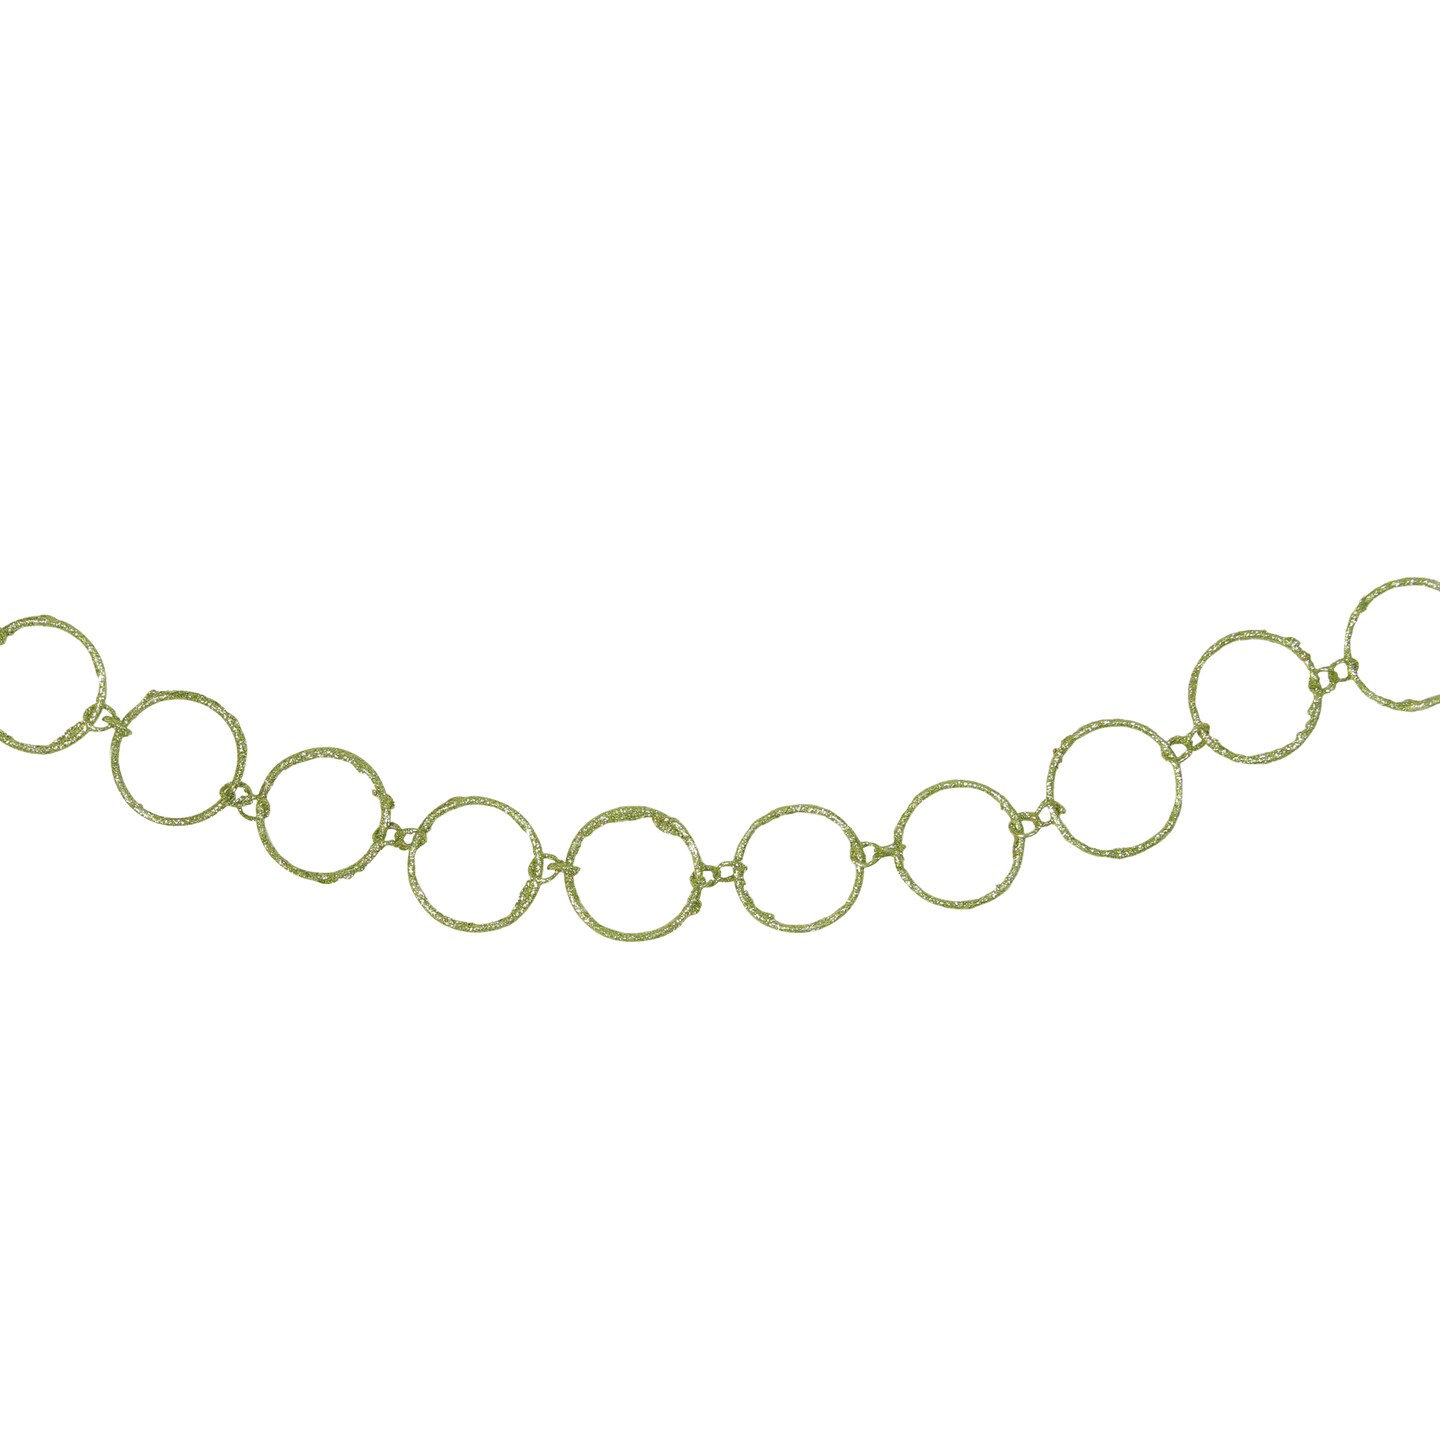 Allstate 5&#x27; x 1.75&#x22; Lime Green Glittered Round Ring Chain Artificial Christmas Garland - Unlit